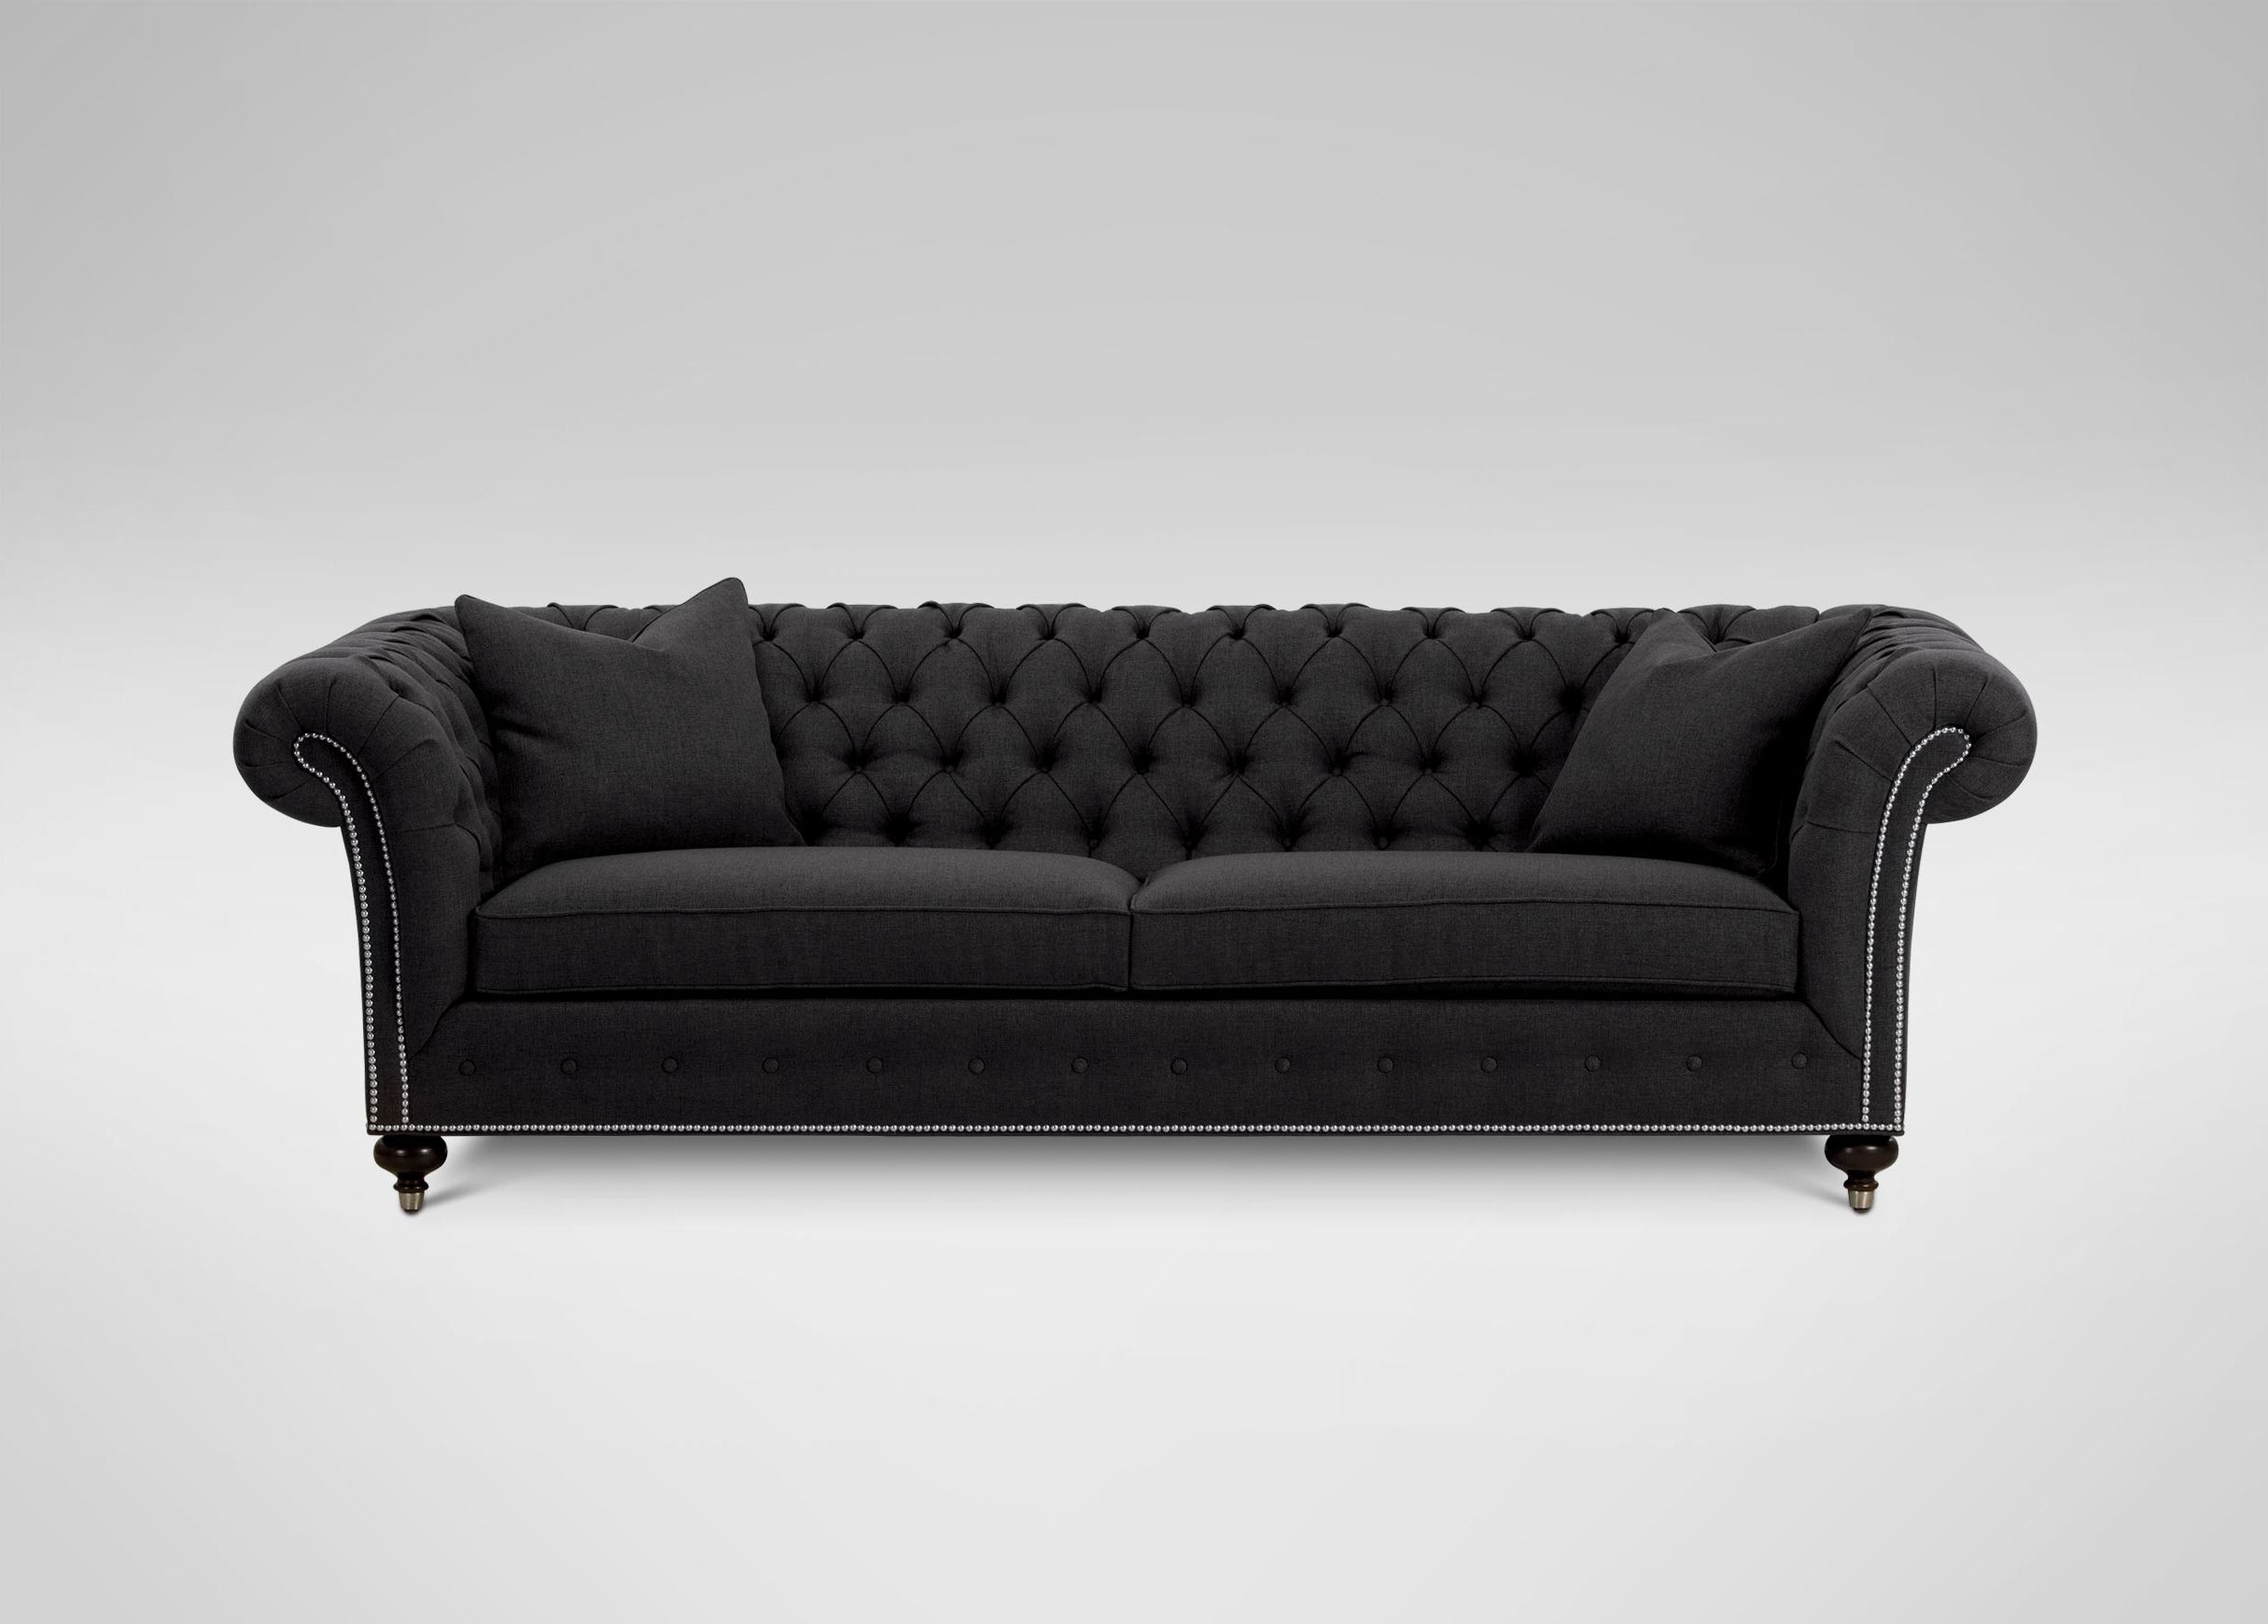 Sofas & Loveseats For Best And Newest Ethan Allen Sofas And Chairs (View 9 of 15)